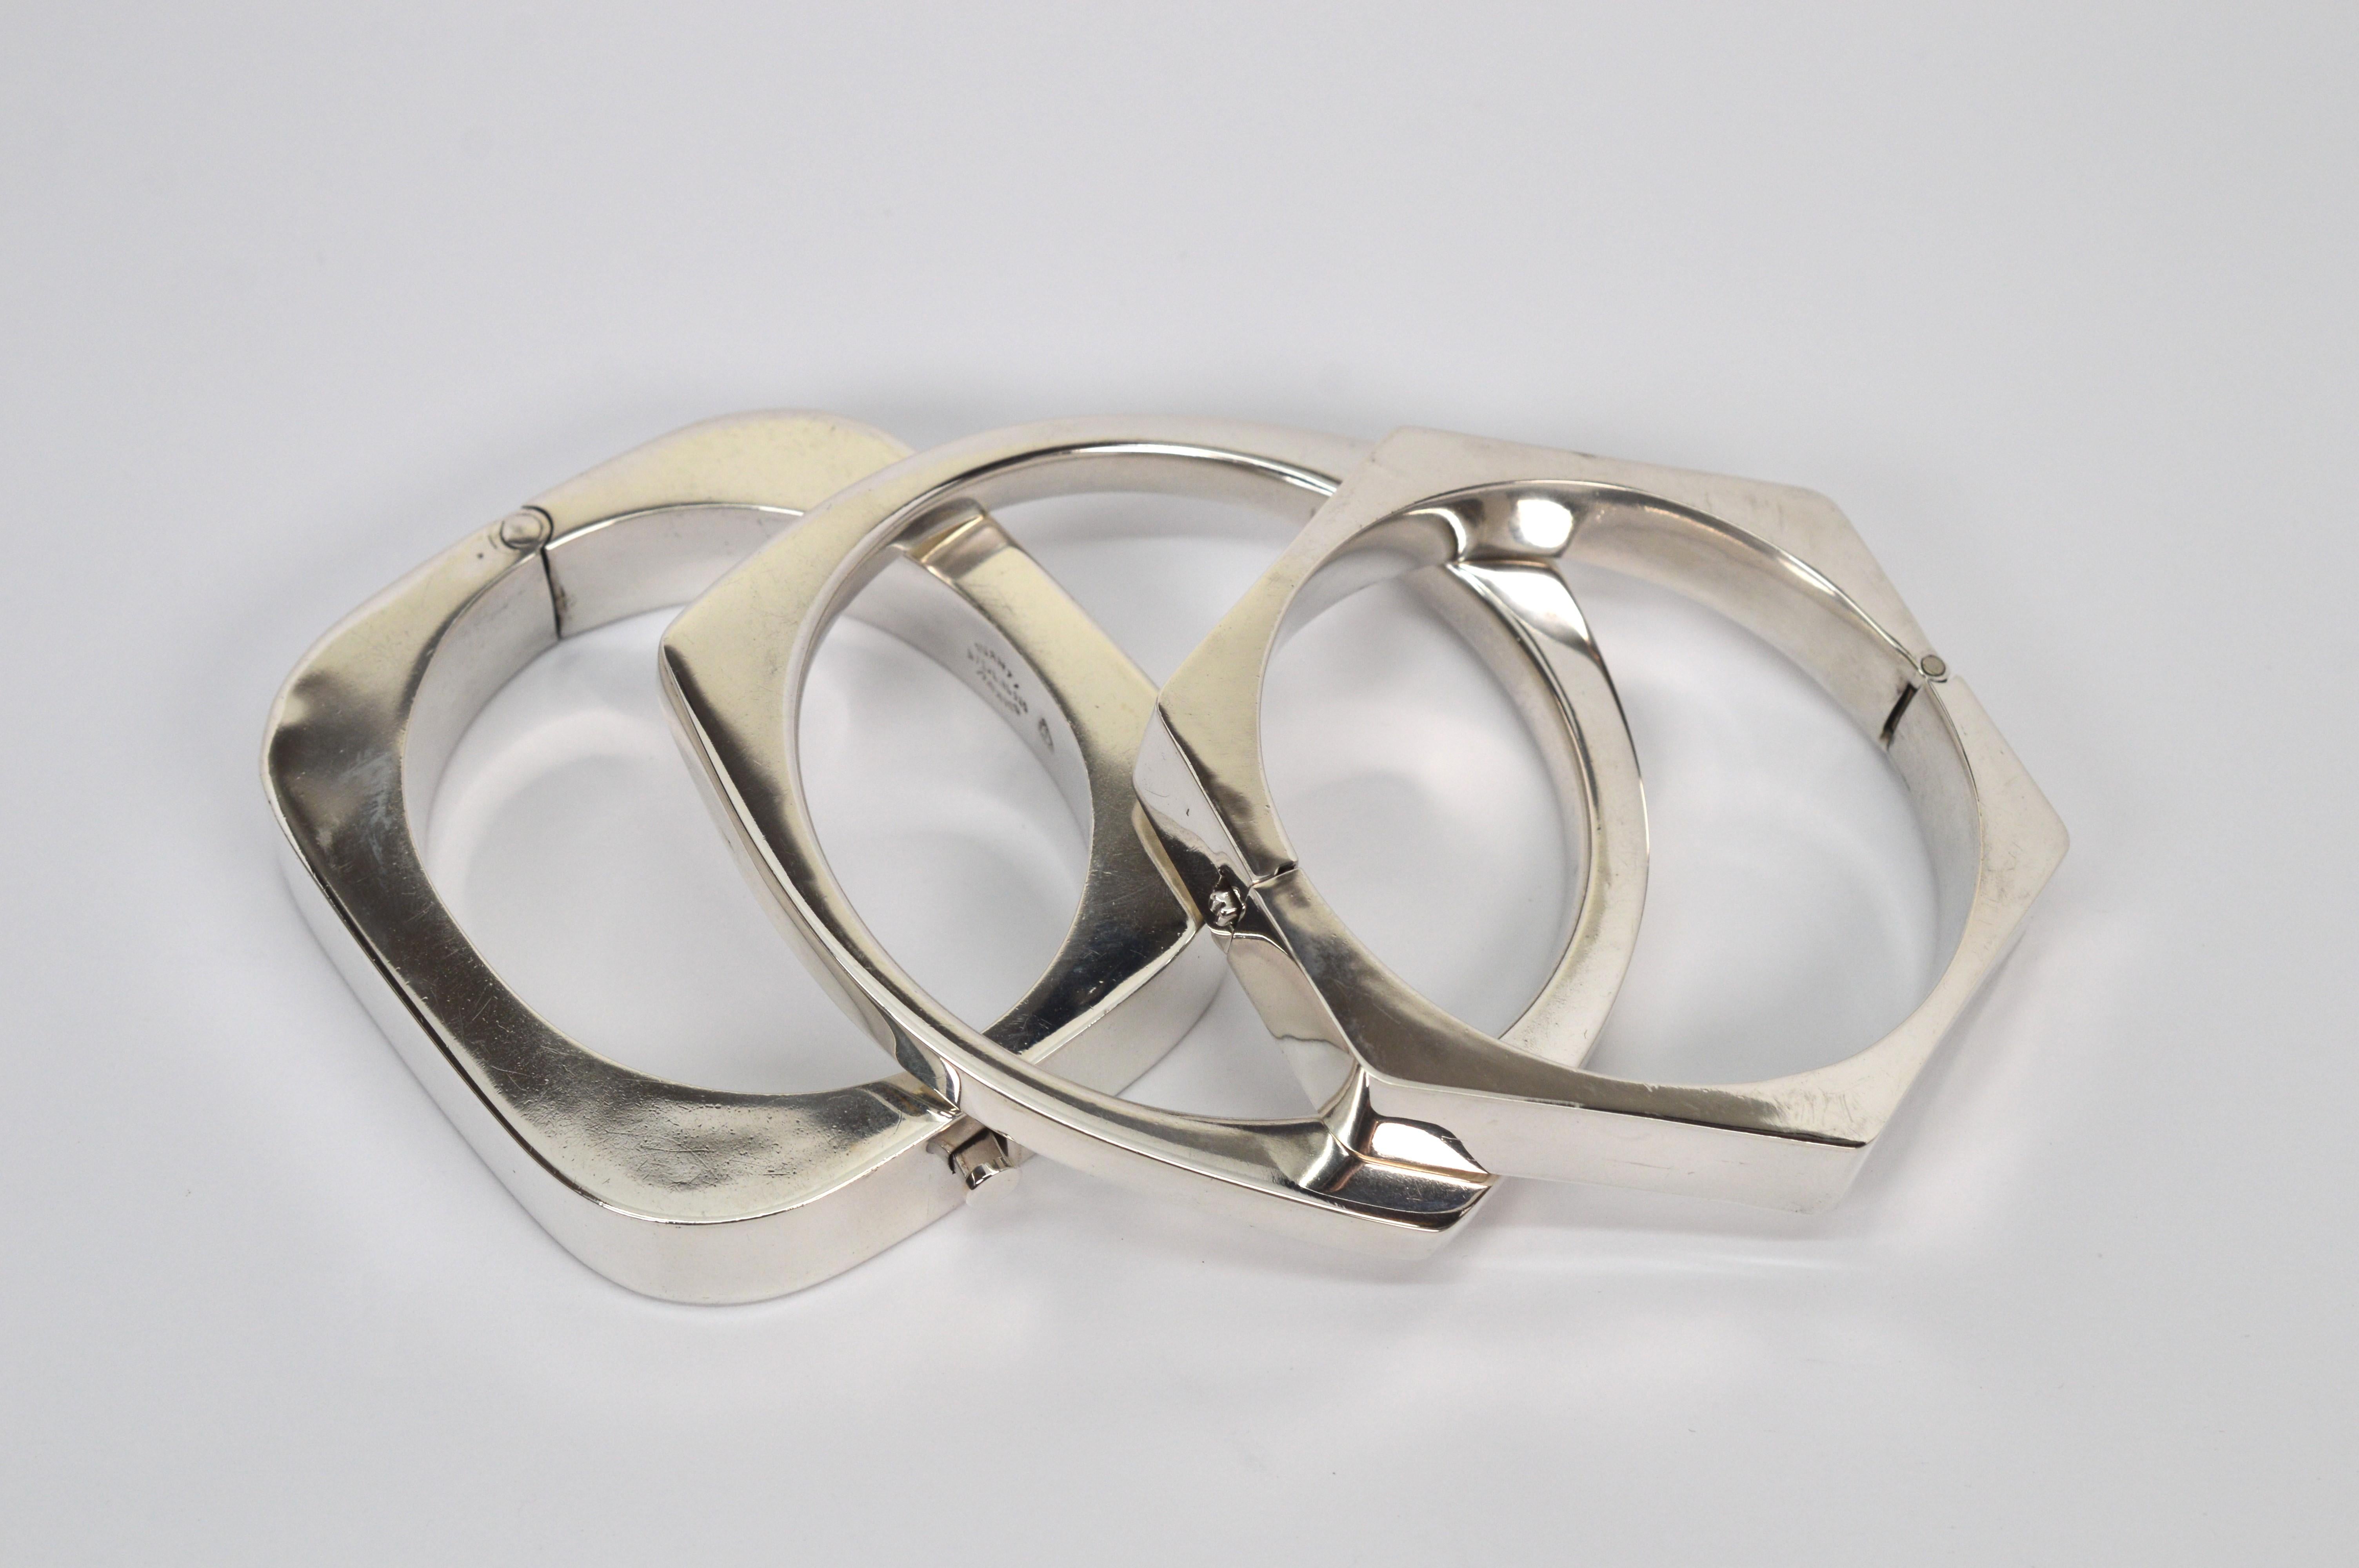 If Boho is your style , this geometric trio of sterling silver bangle bracelets is on target. Three vintage complementing pieces which when worn together create flair and make a silver statement. Of course any of the trio can be worn separately or